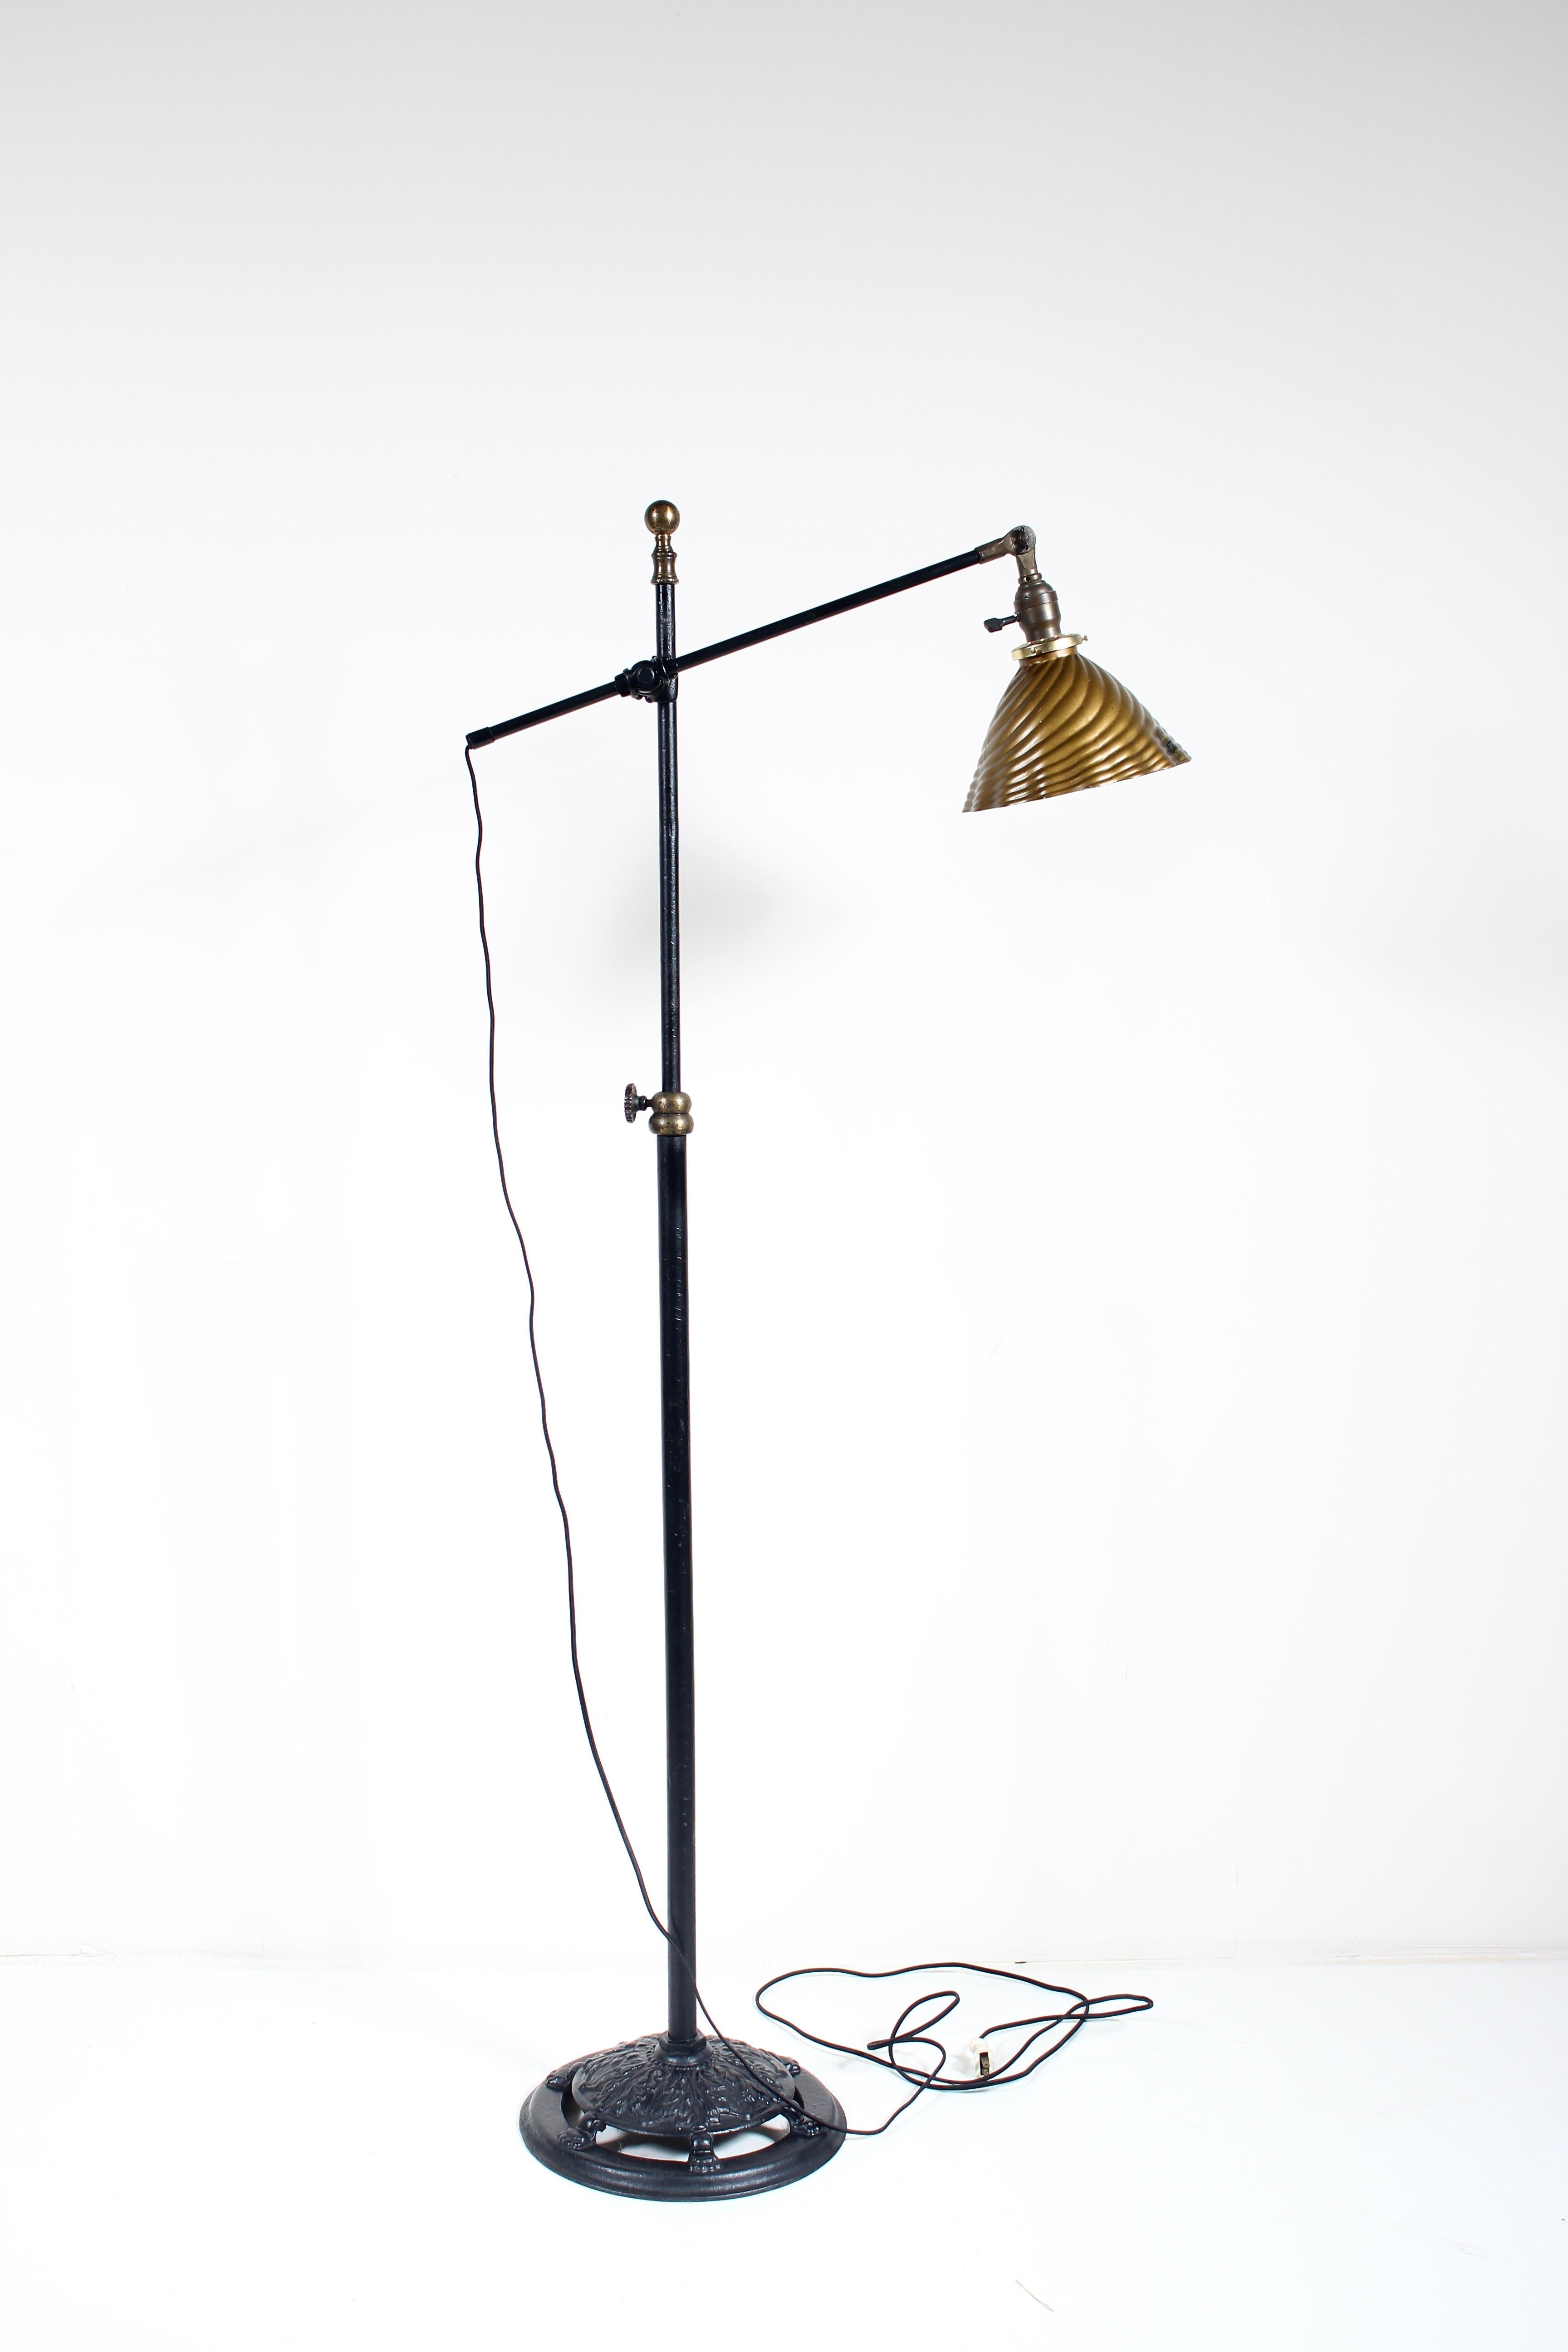 Early Articulating O. C. White Iron Arm & Brass Floor Lamp + Mercury Glass Shade For Sale 5